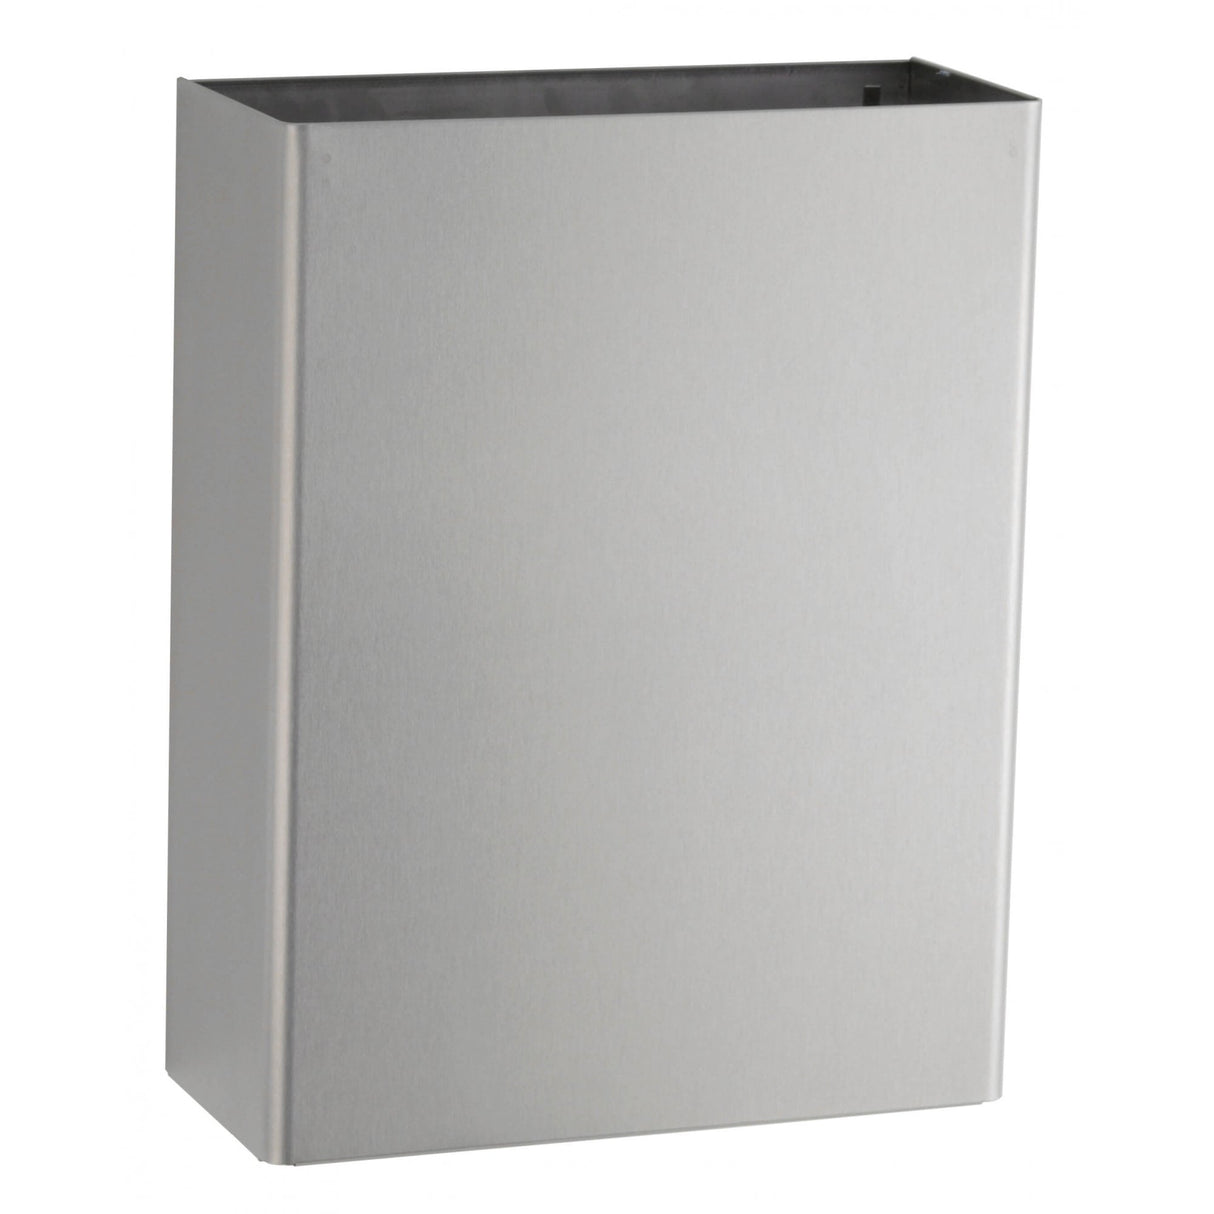 B-279 Open Top Waste Bin for Wall Mounting